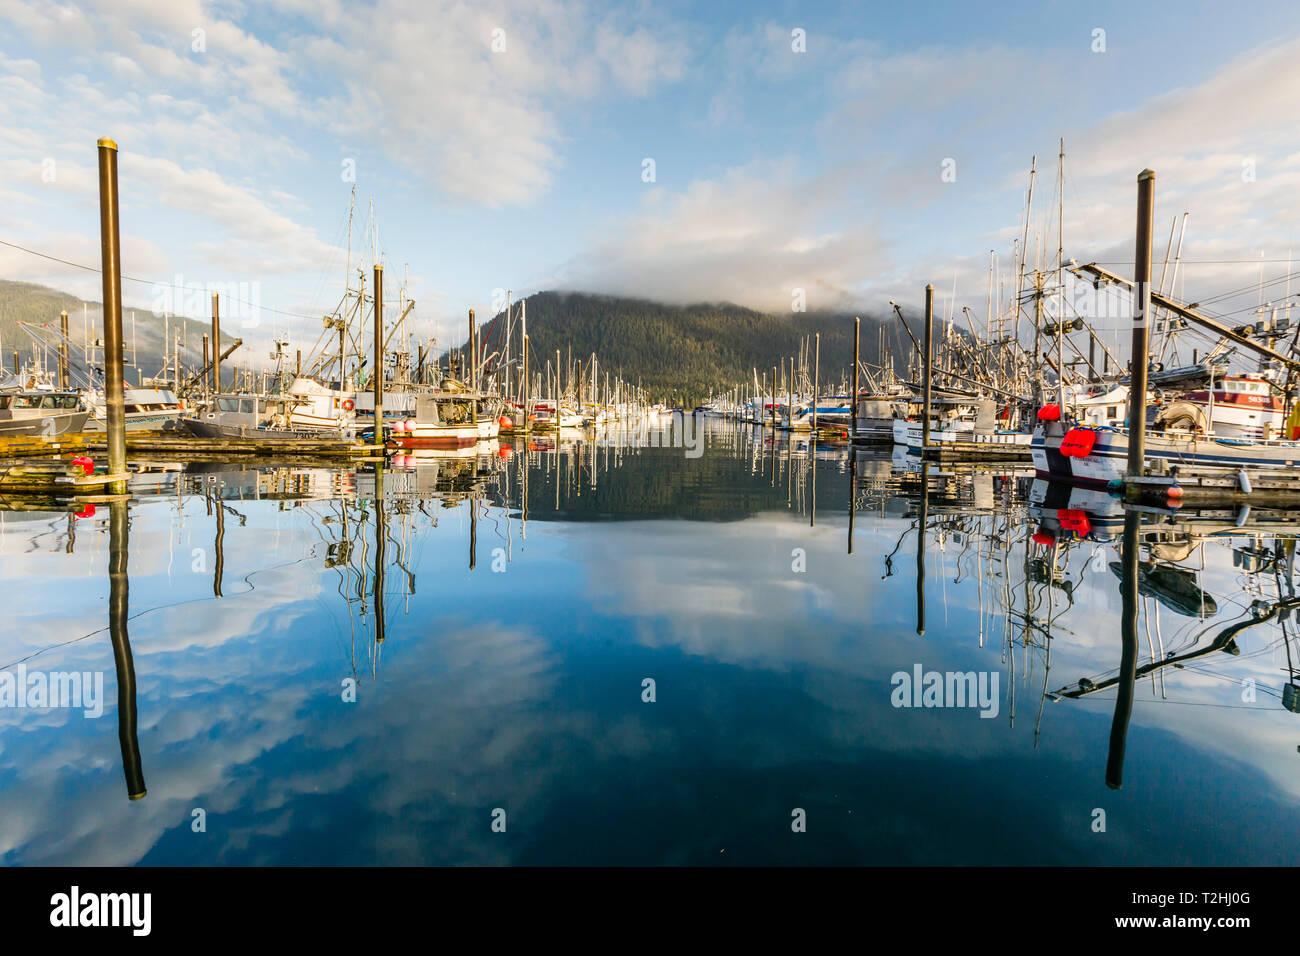 View of the commercial fishing fleet docked in the harbour at Petersburg, Southeast Alaska, United States of America Stock Photo